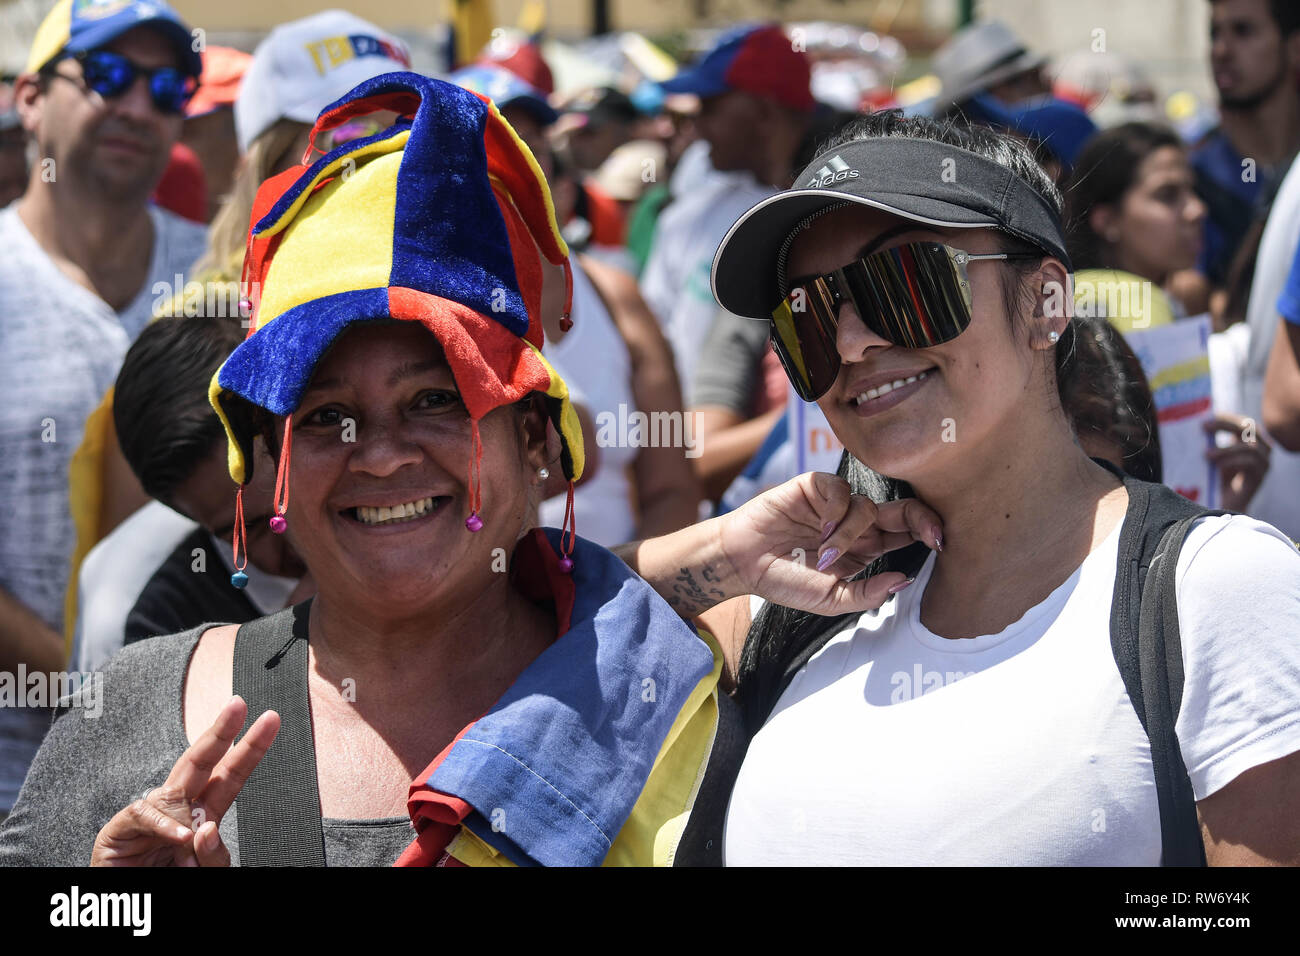 Two female supporters of interim president Juan Guaido are seen during a rally in support of Juan Guaido. Juan Guaido, the Venezuelan opposition leader, where many nations have recognized as the legitimate interim president of Venezuela, greets his supporters during a rally against the government of President Nicolas Maduro in Caracas. Stock Photo